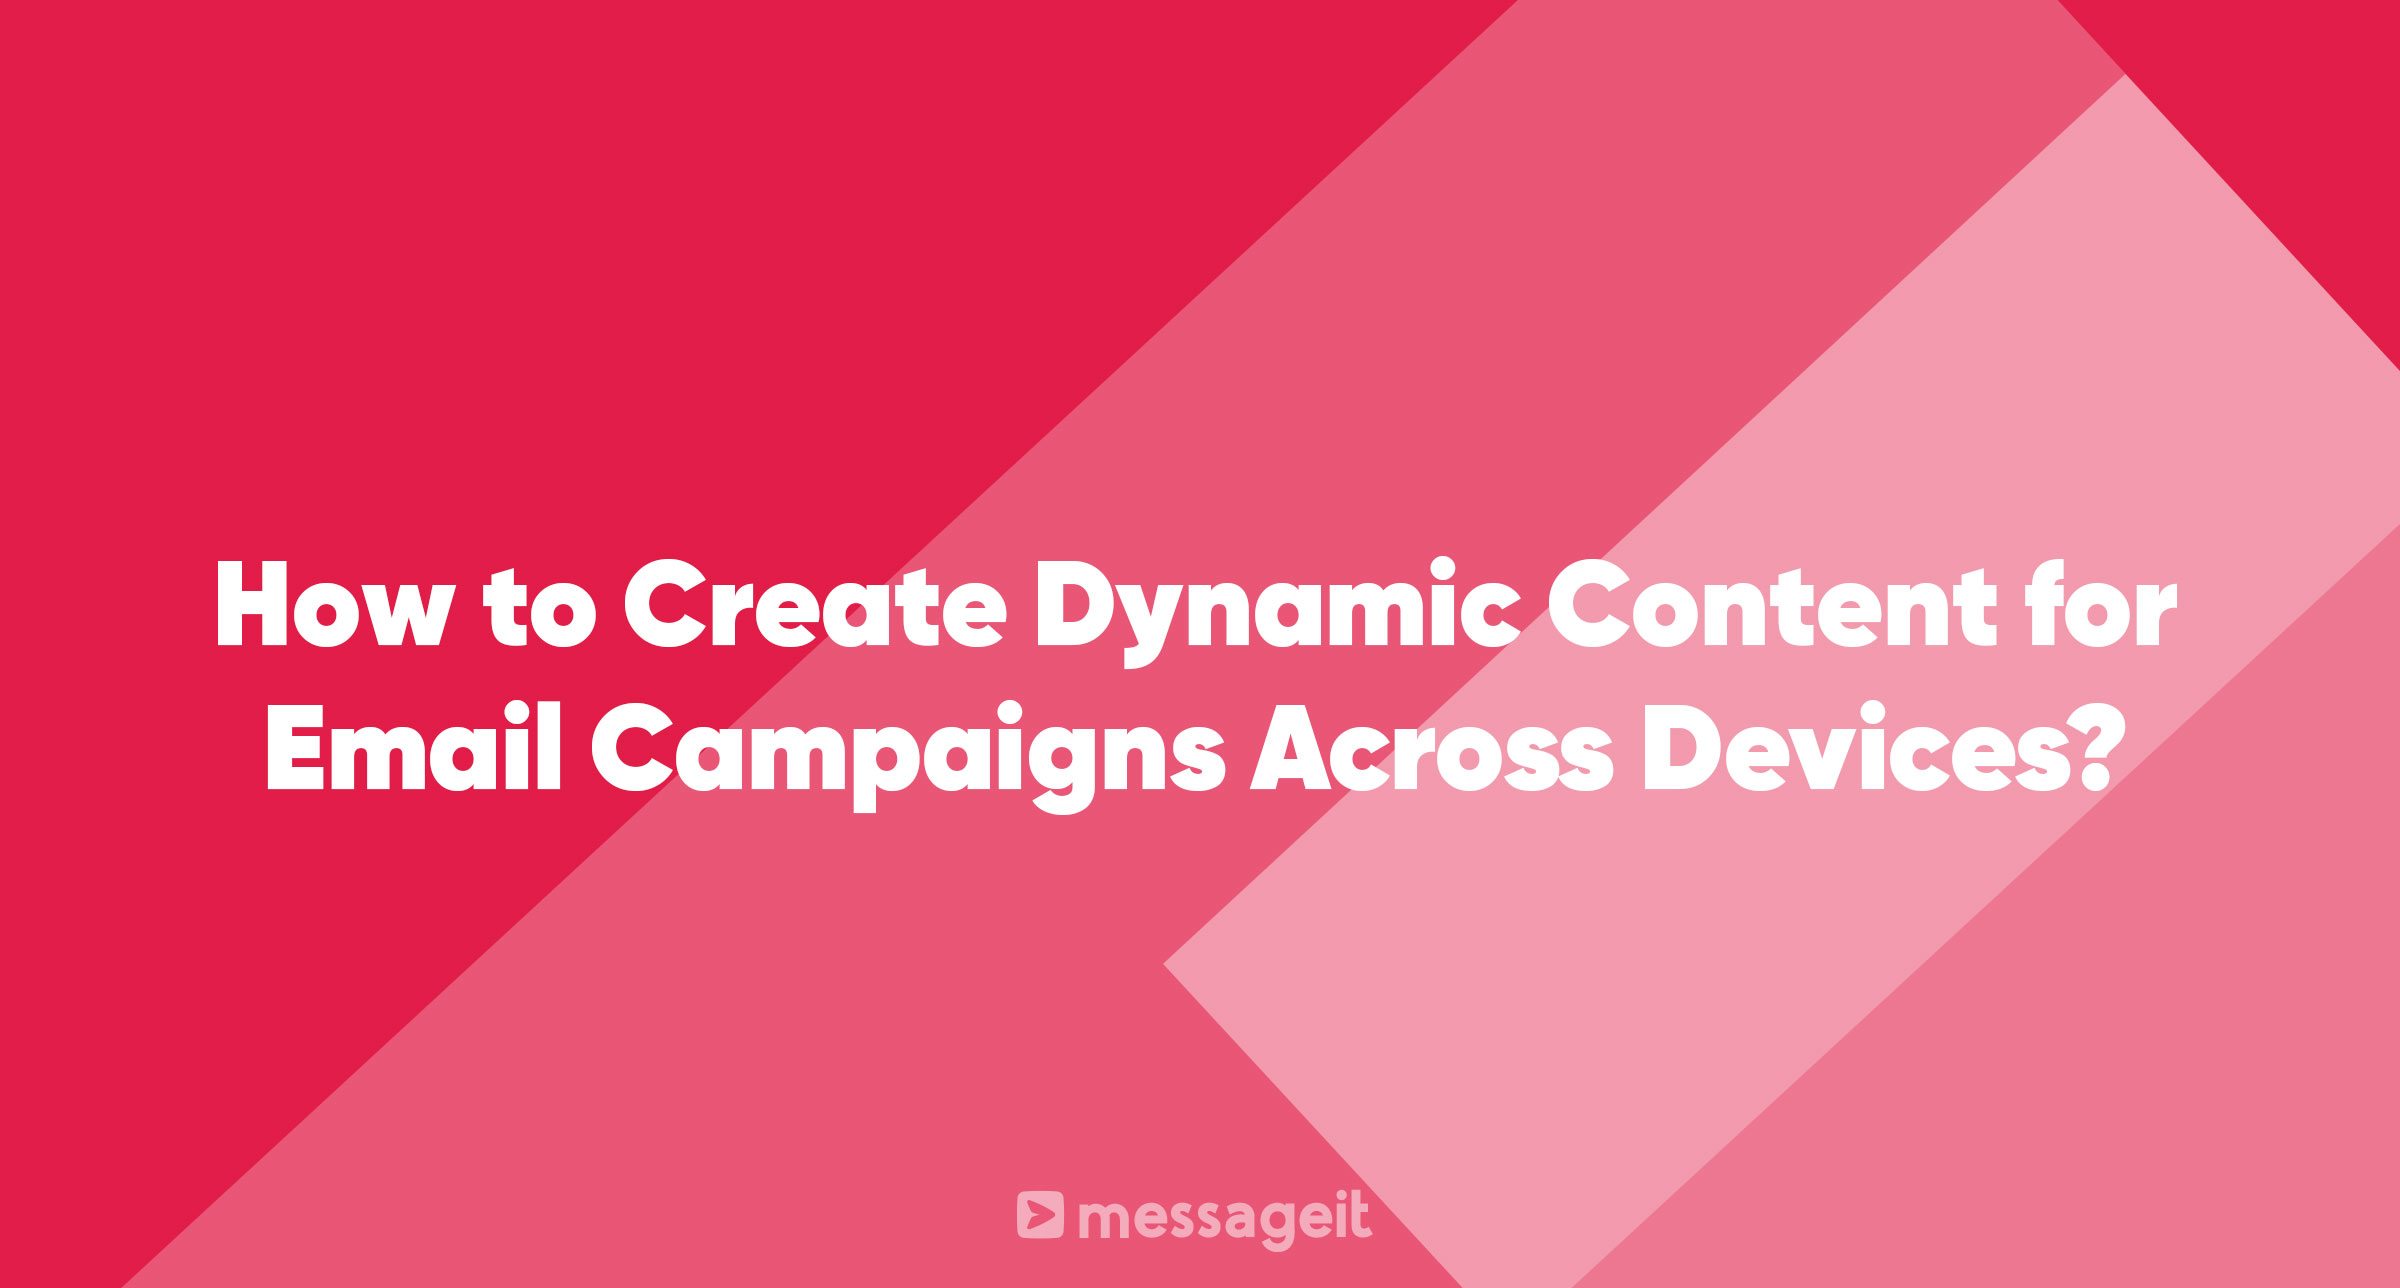 Article | How to Create Dynamic Content for Email Campaigns Across Devices?